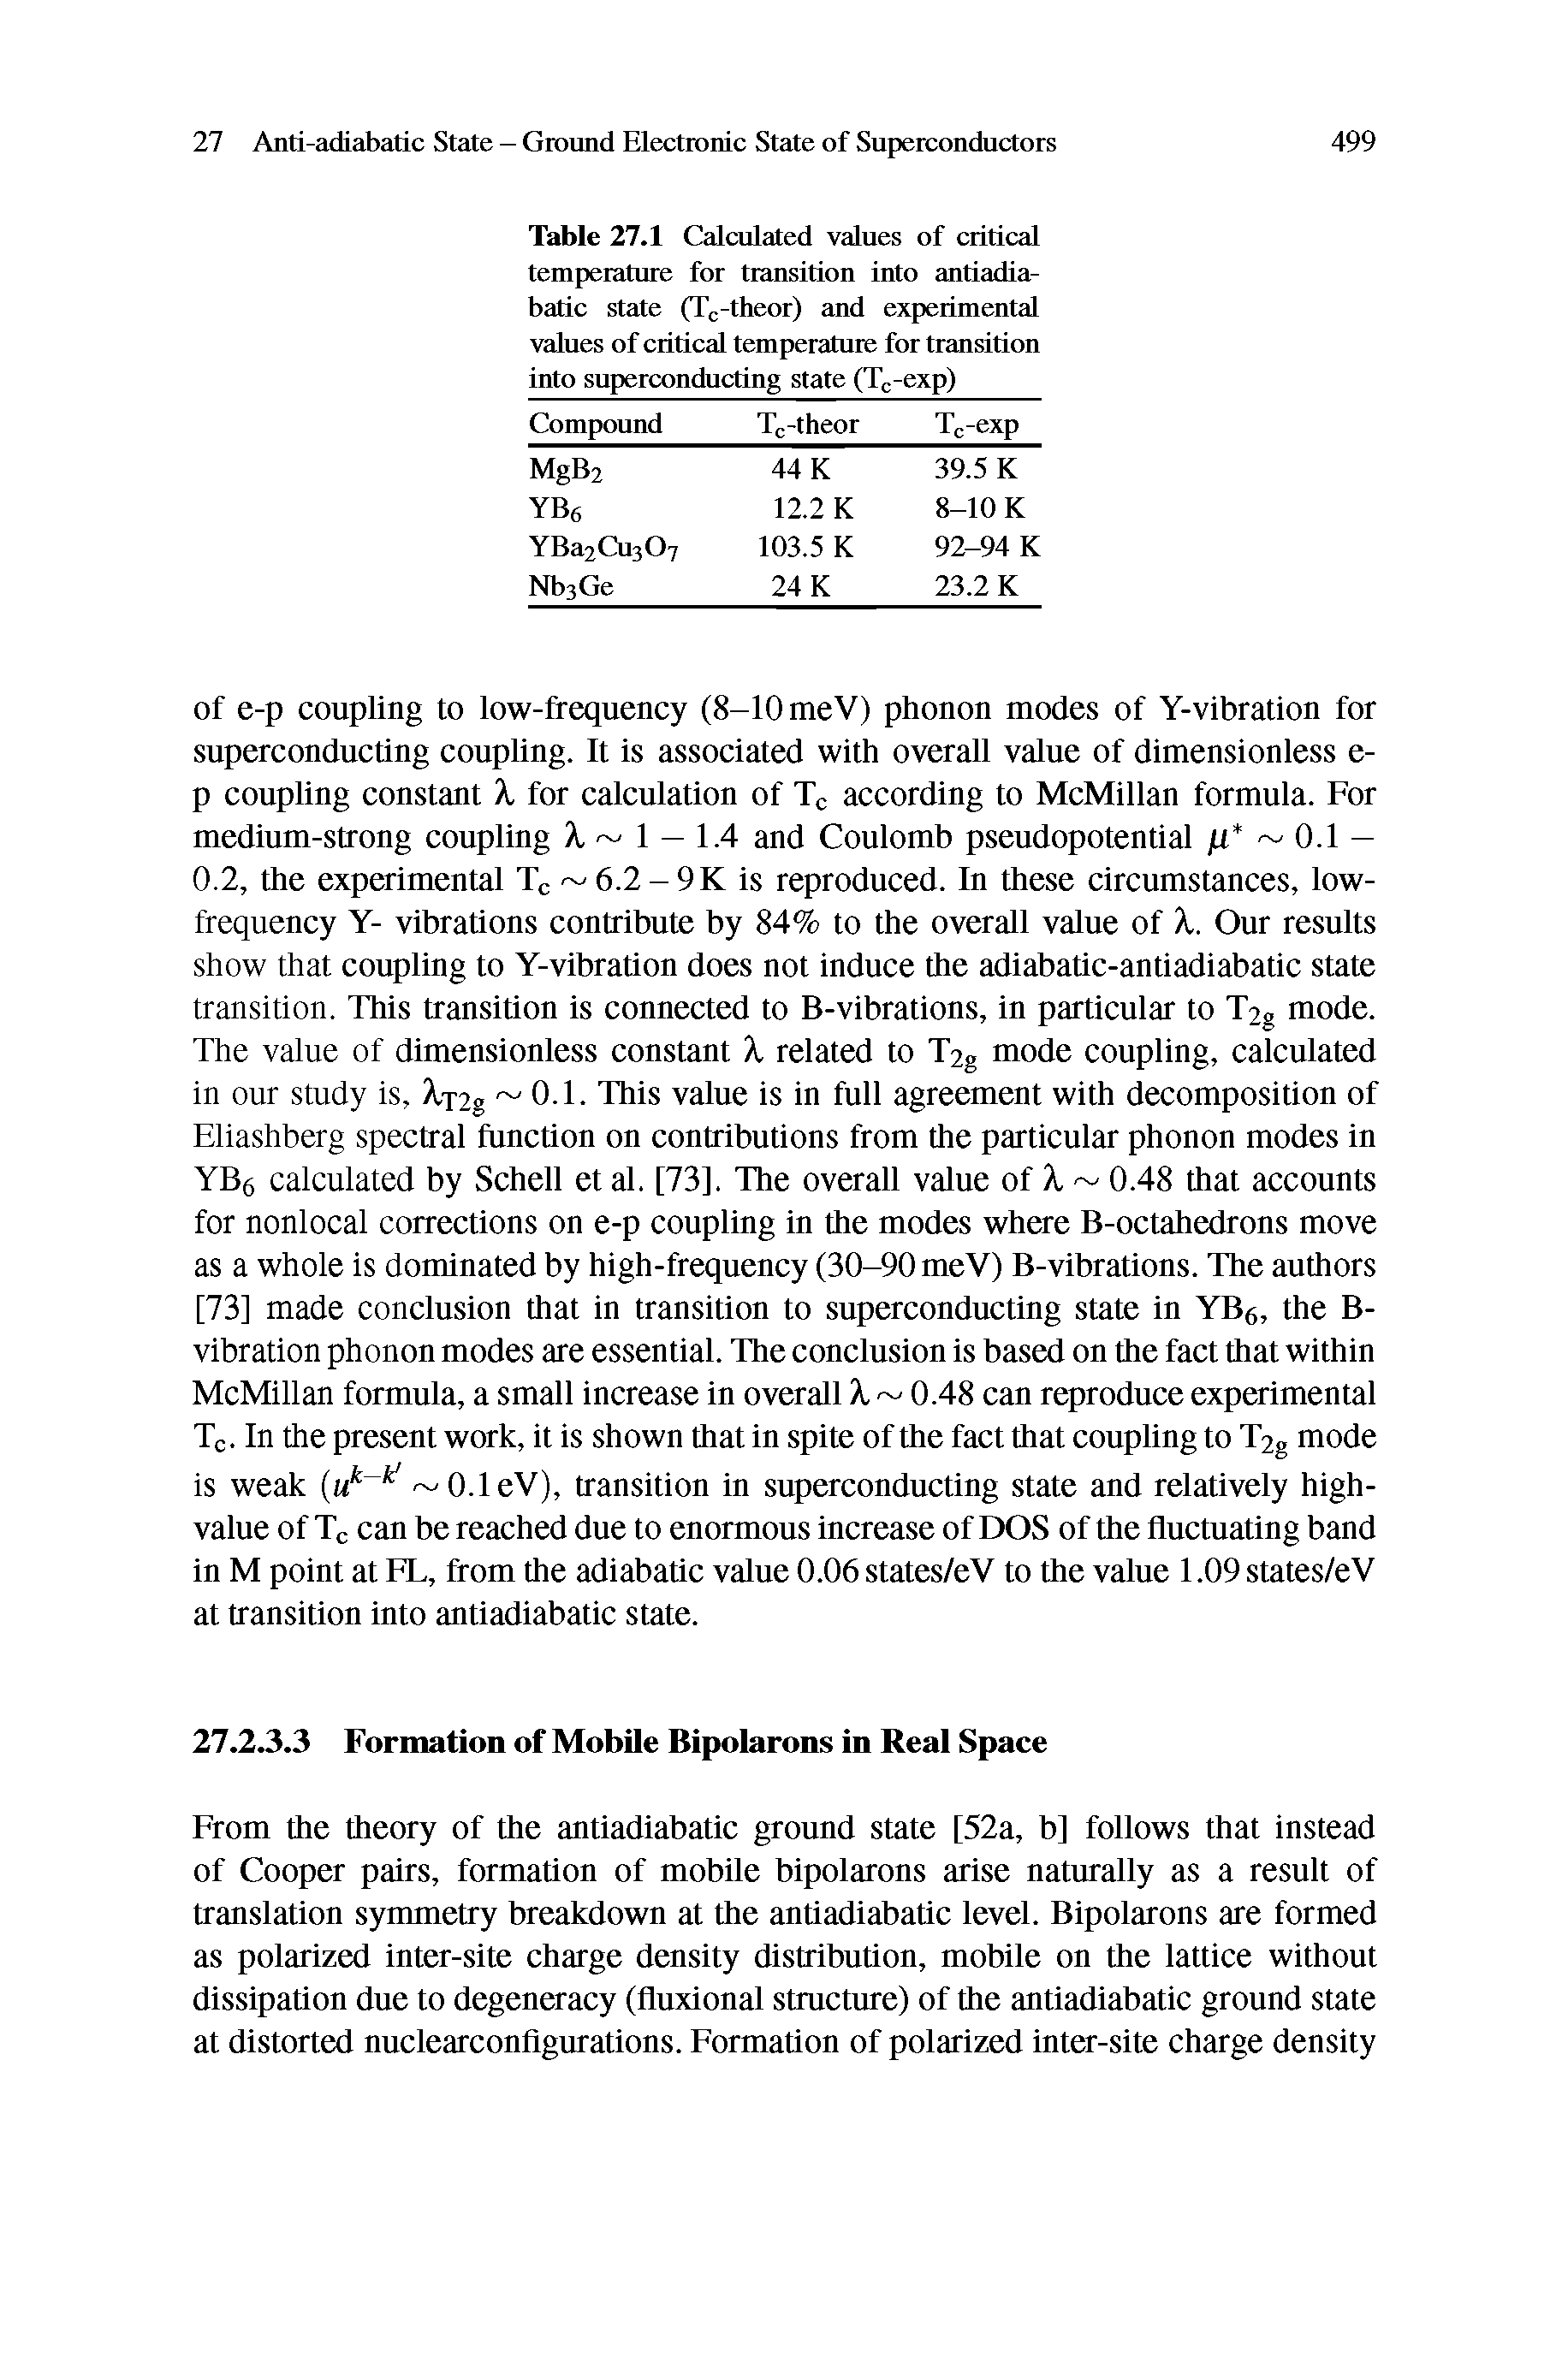 Table 27.1 Calculated values of critical temperature for transition into antiadia-batic state (Tc-theor) and experimental values of critical temperature for transition into superconducting state (Tc-exp)...